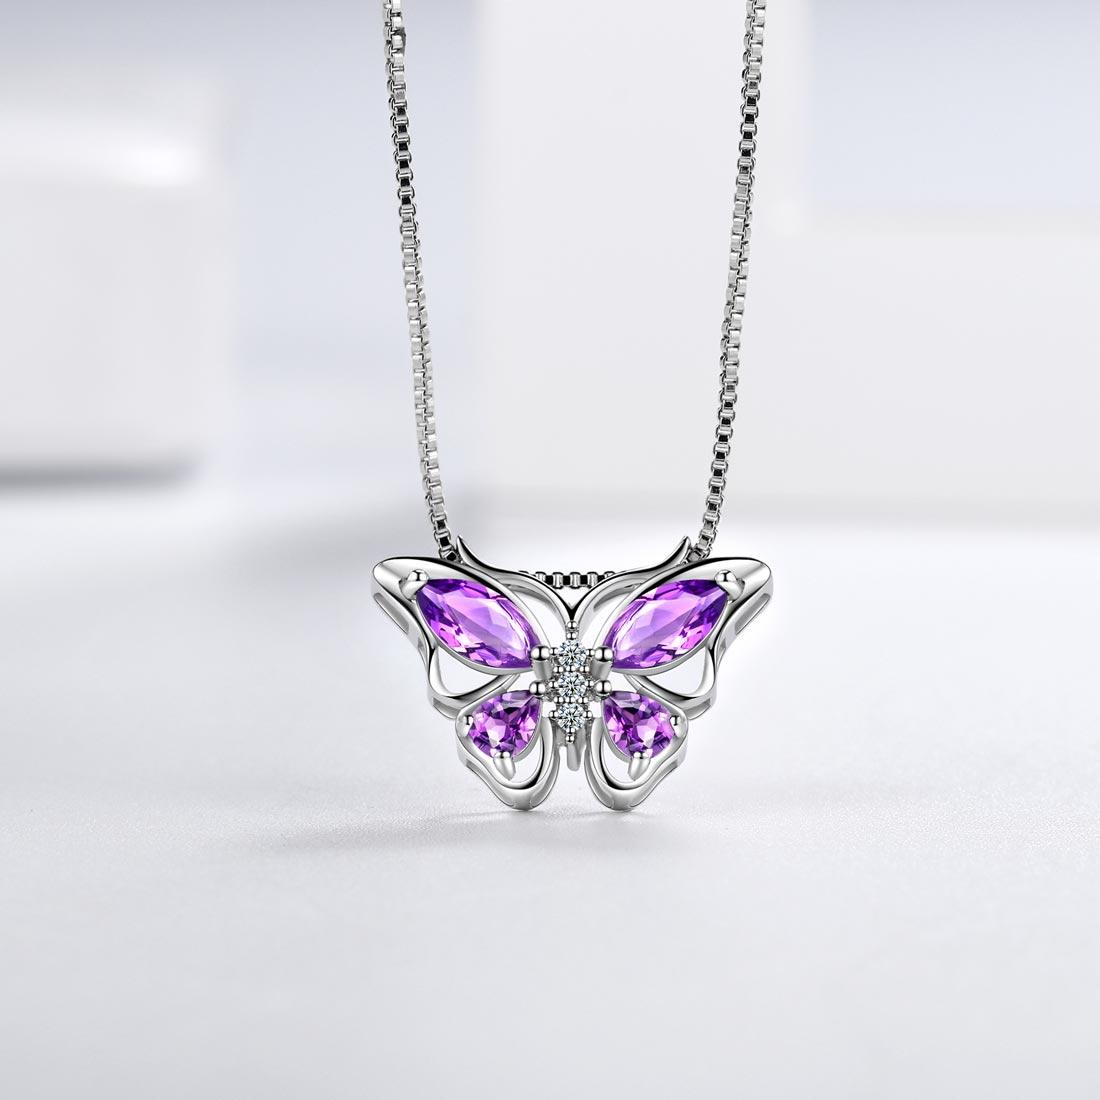 Butterfly Pendant Necklace Birthstone February Amethyst - Necklaces - Aurora Tears